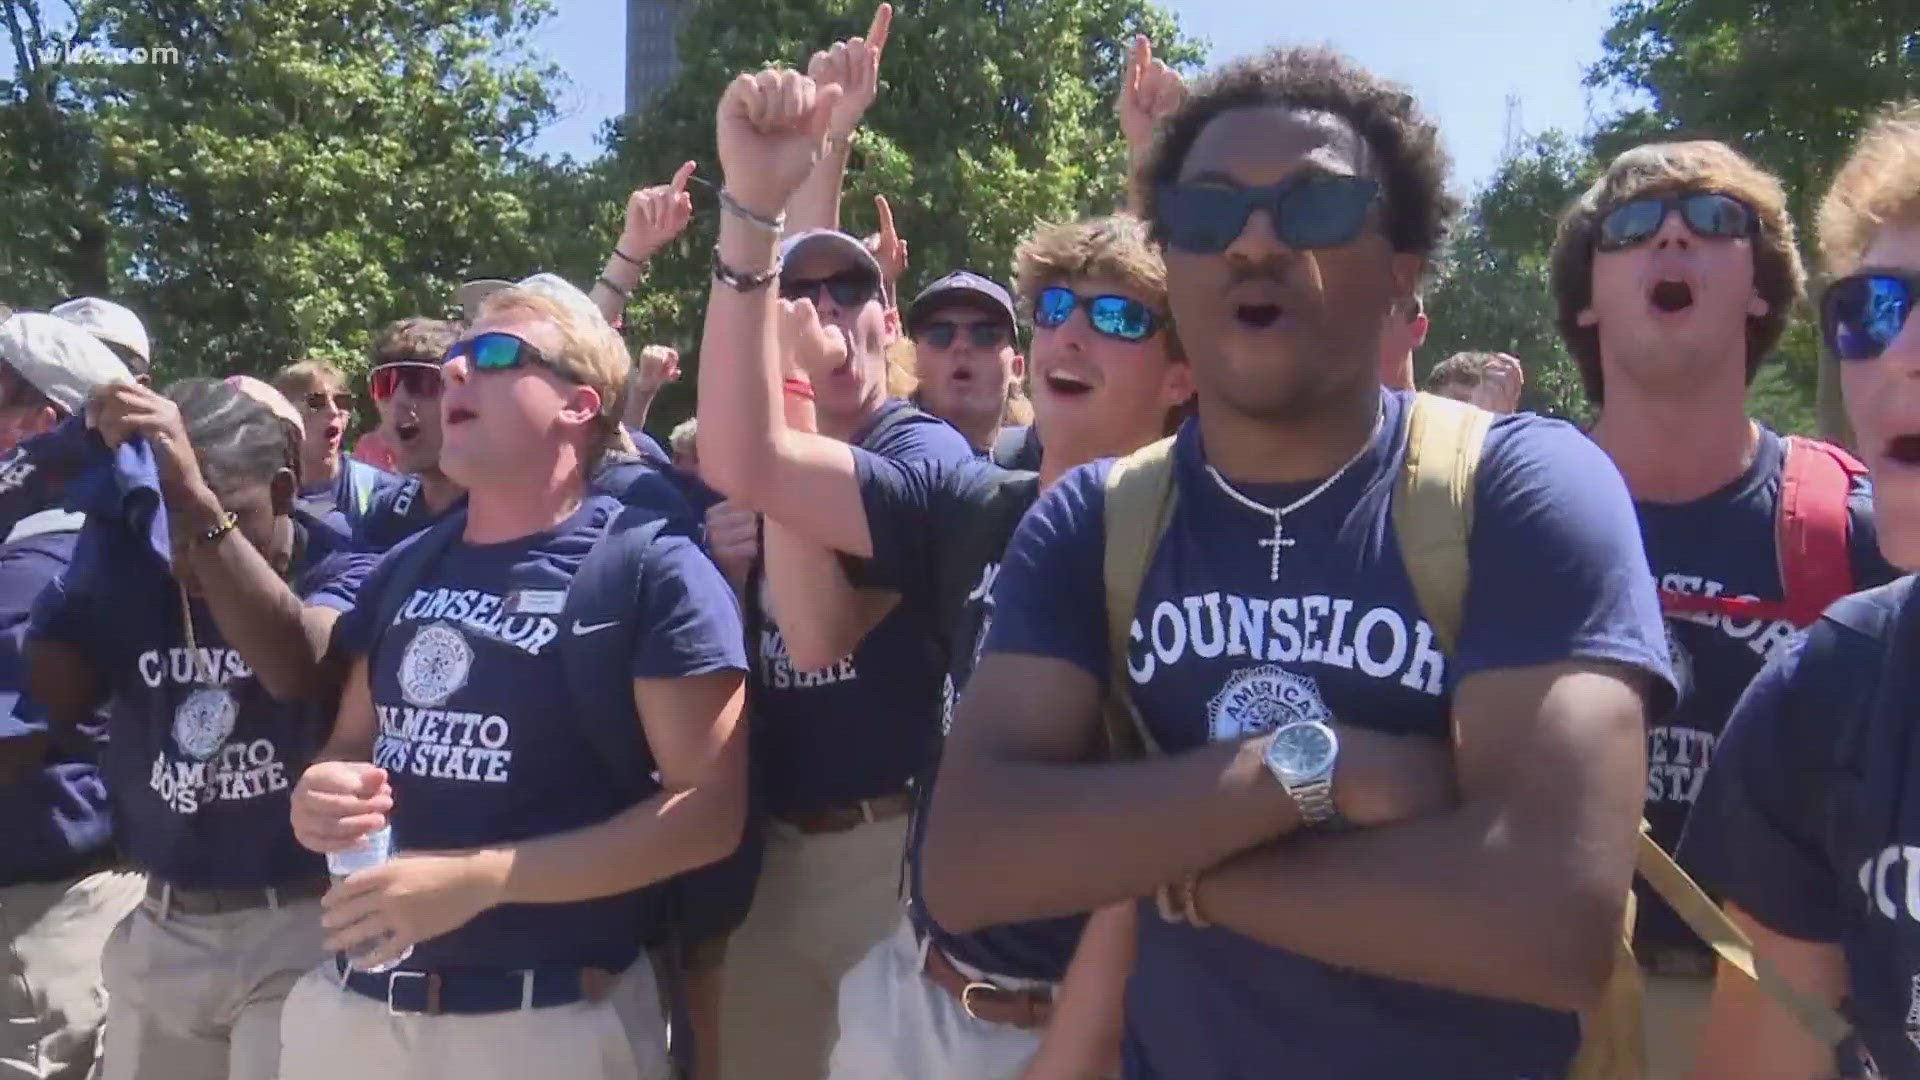 On Friday, Palmetto Boys and Girls State held their annual parade at the State House.